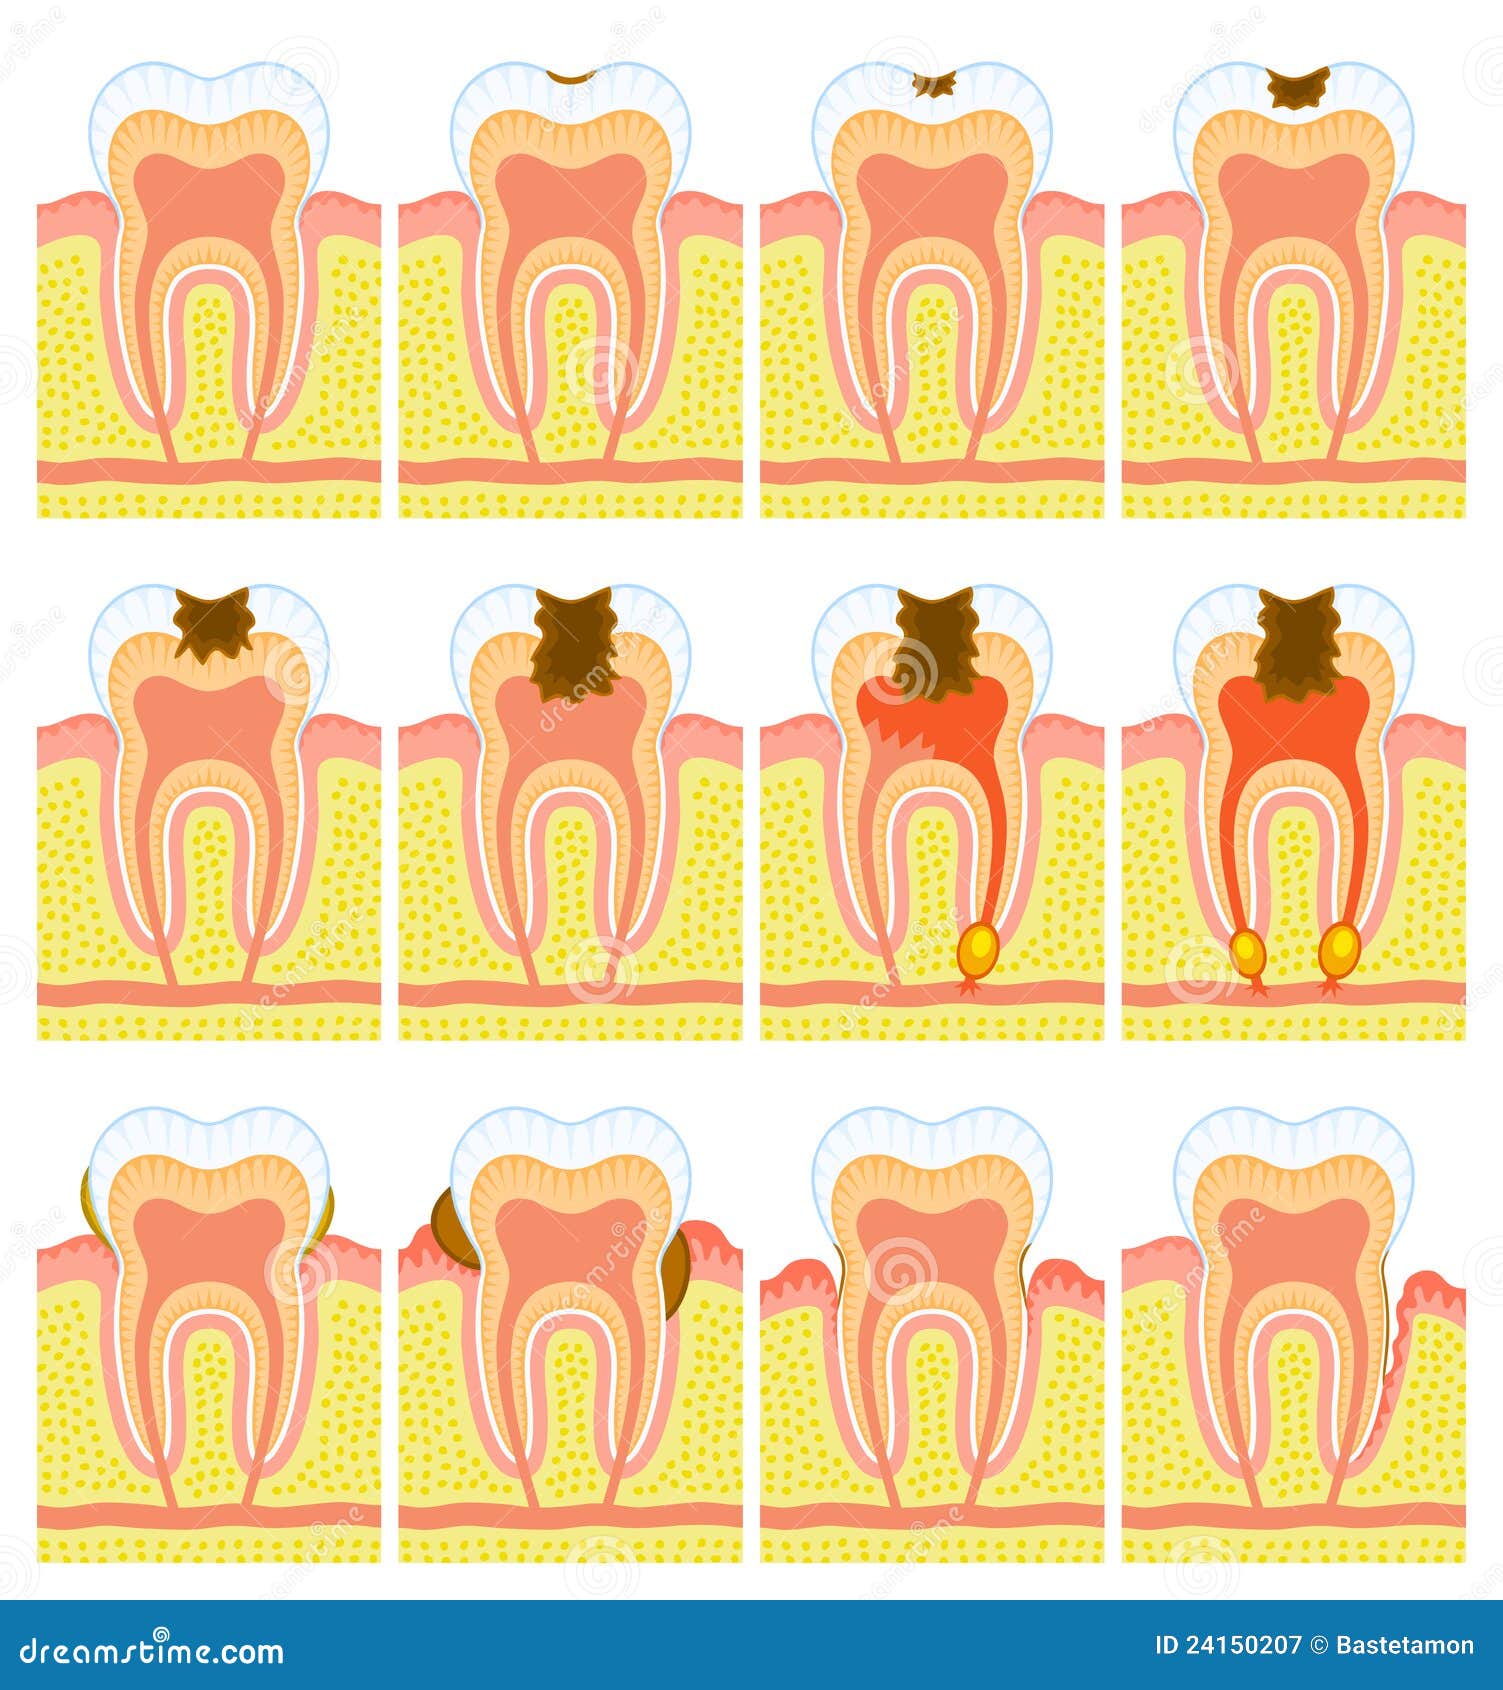 internal structure of tooth